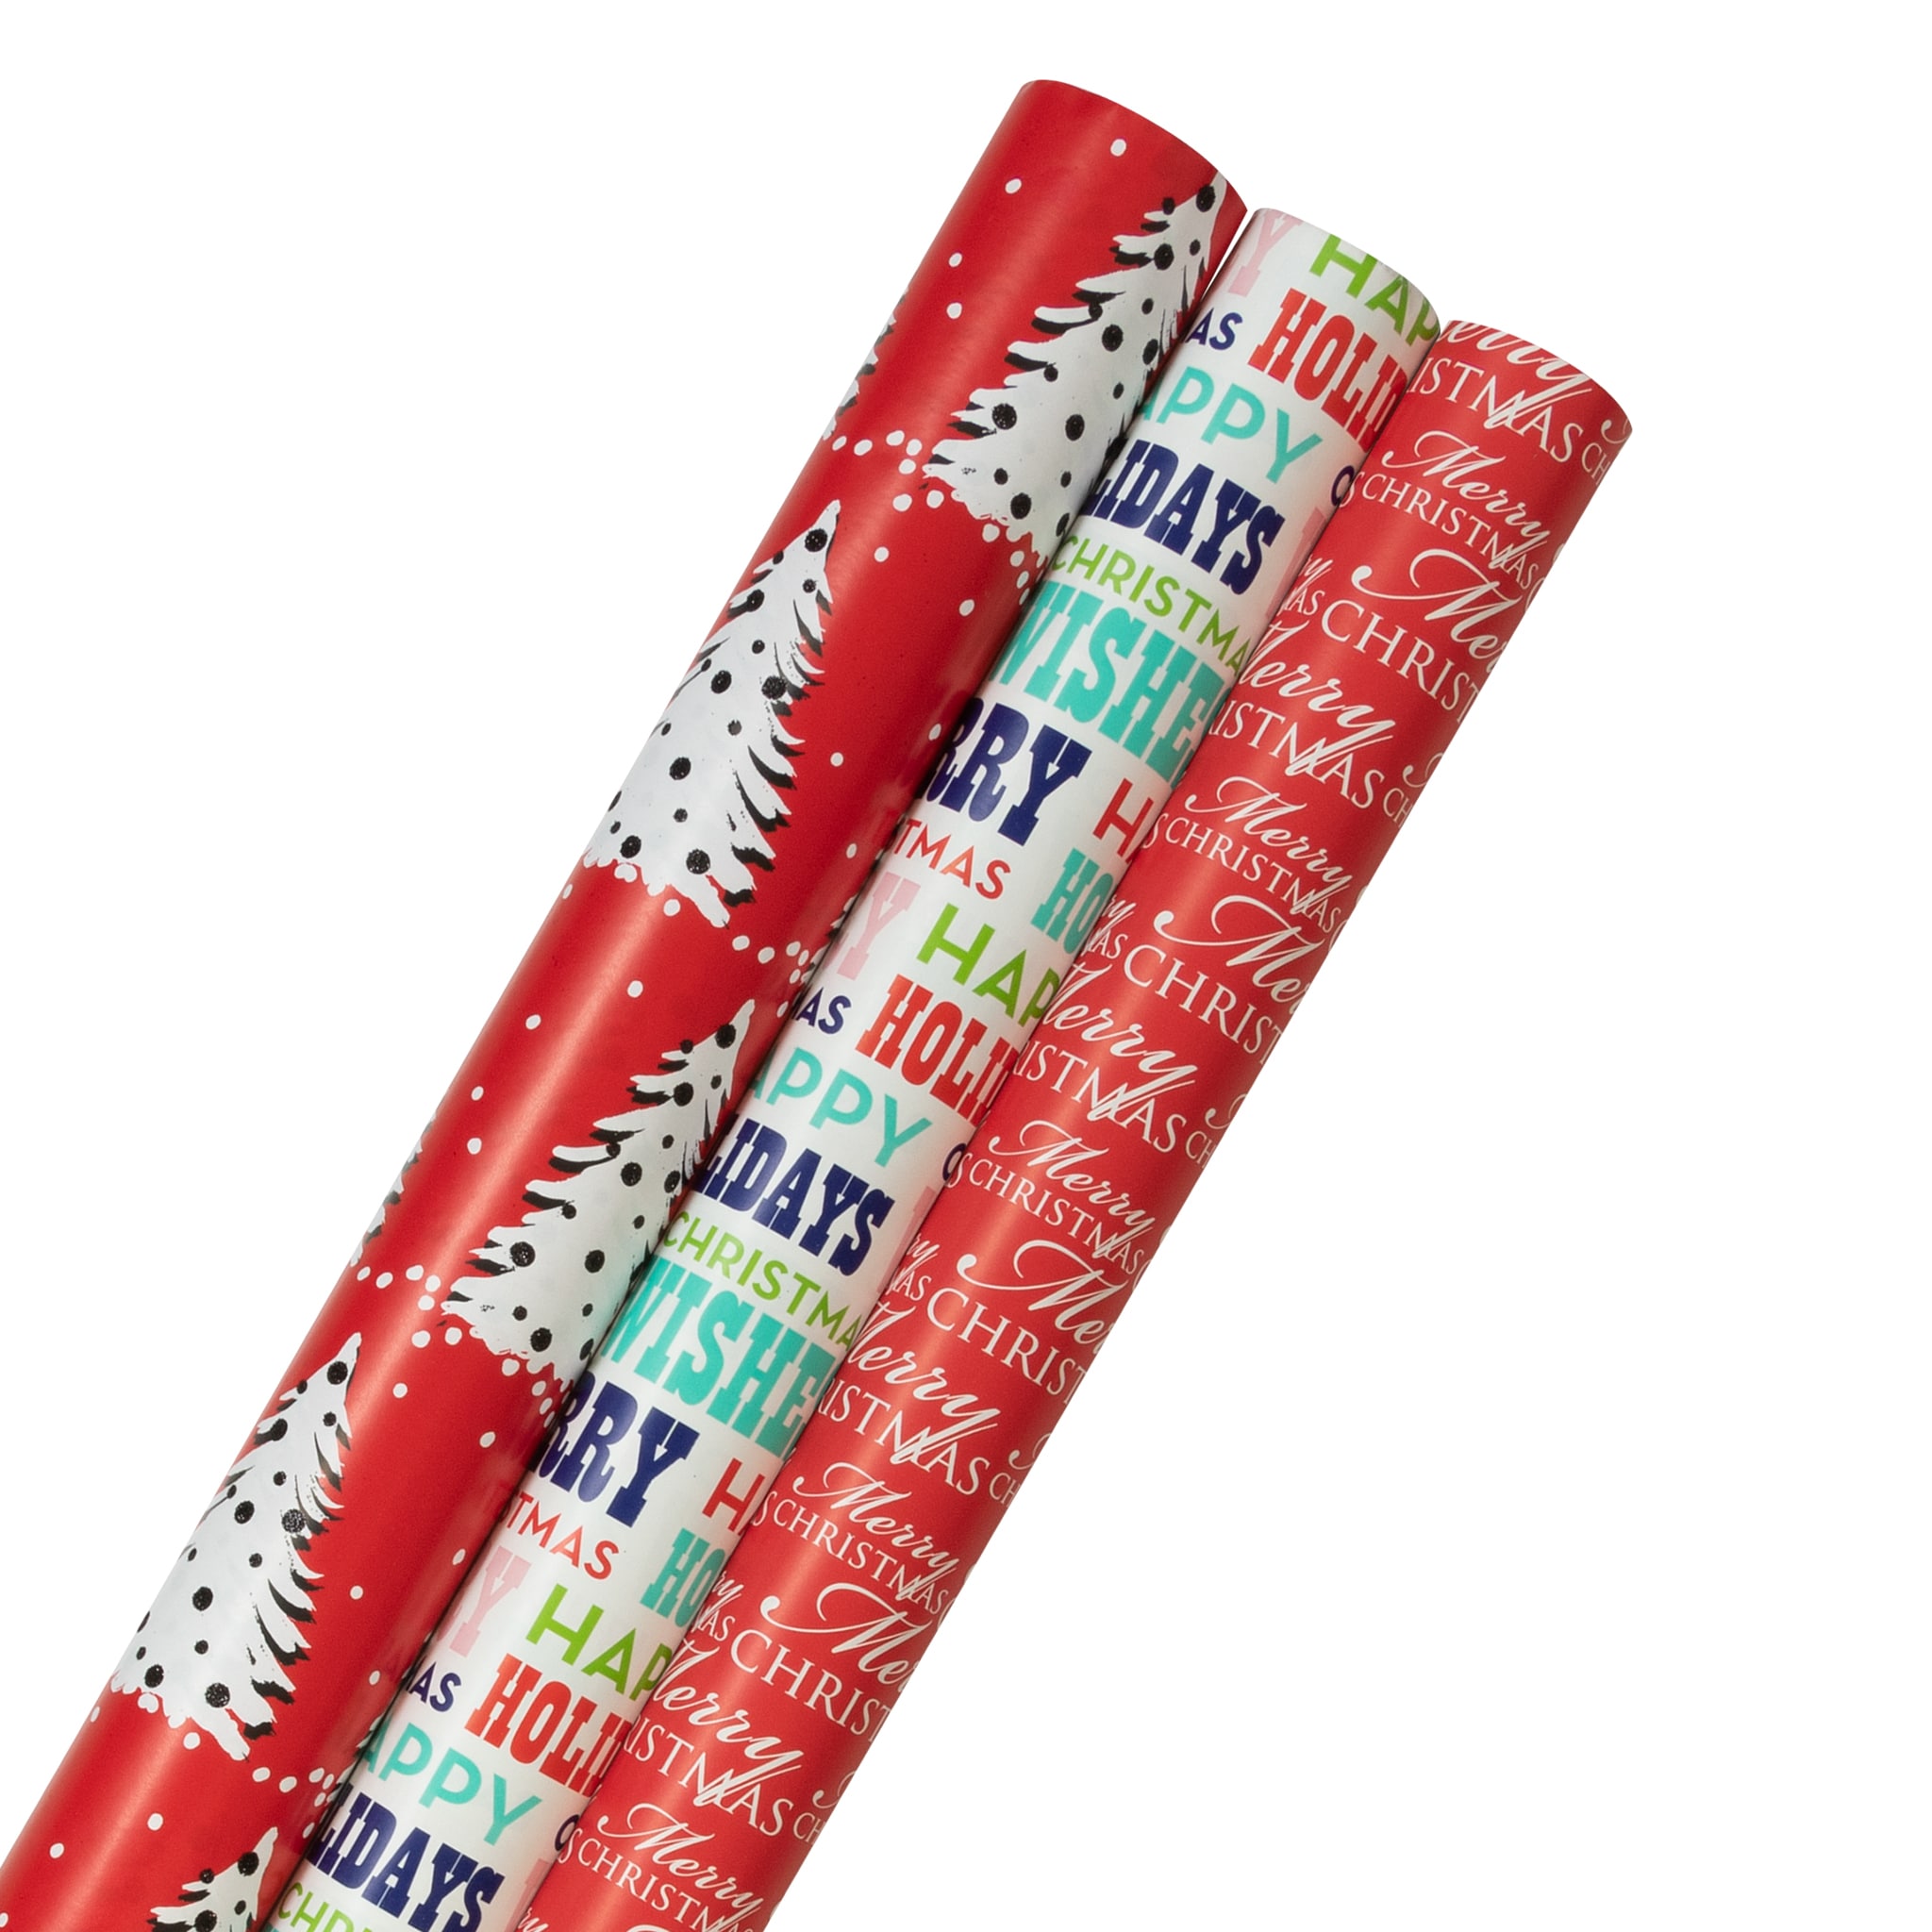 Wrapping Paper for sale in Lipan, Texas